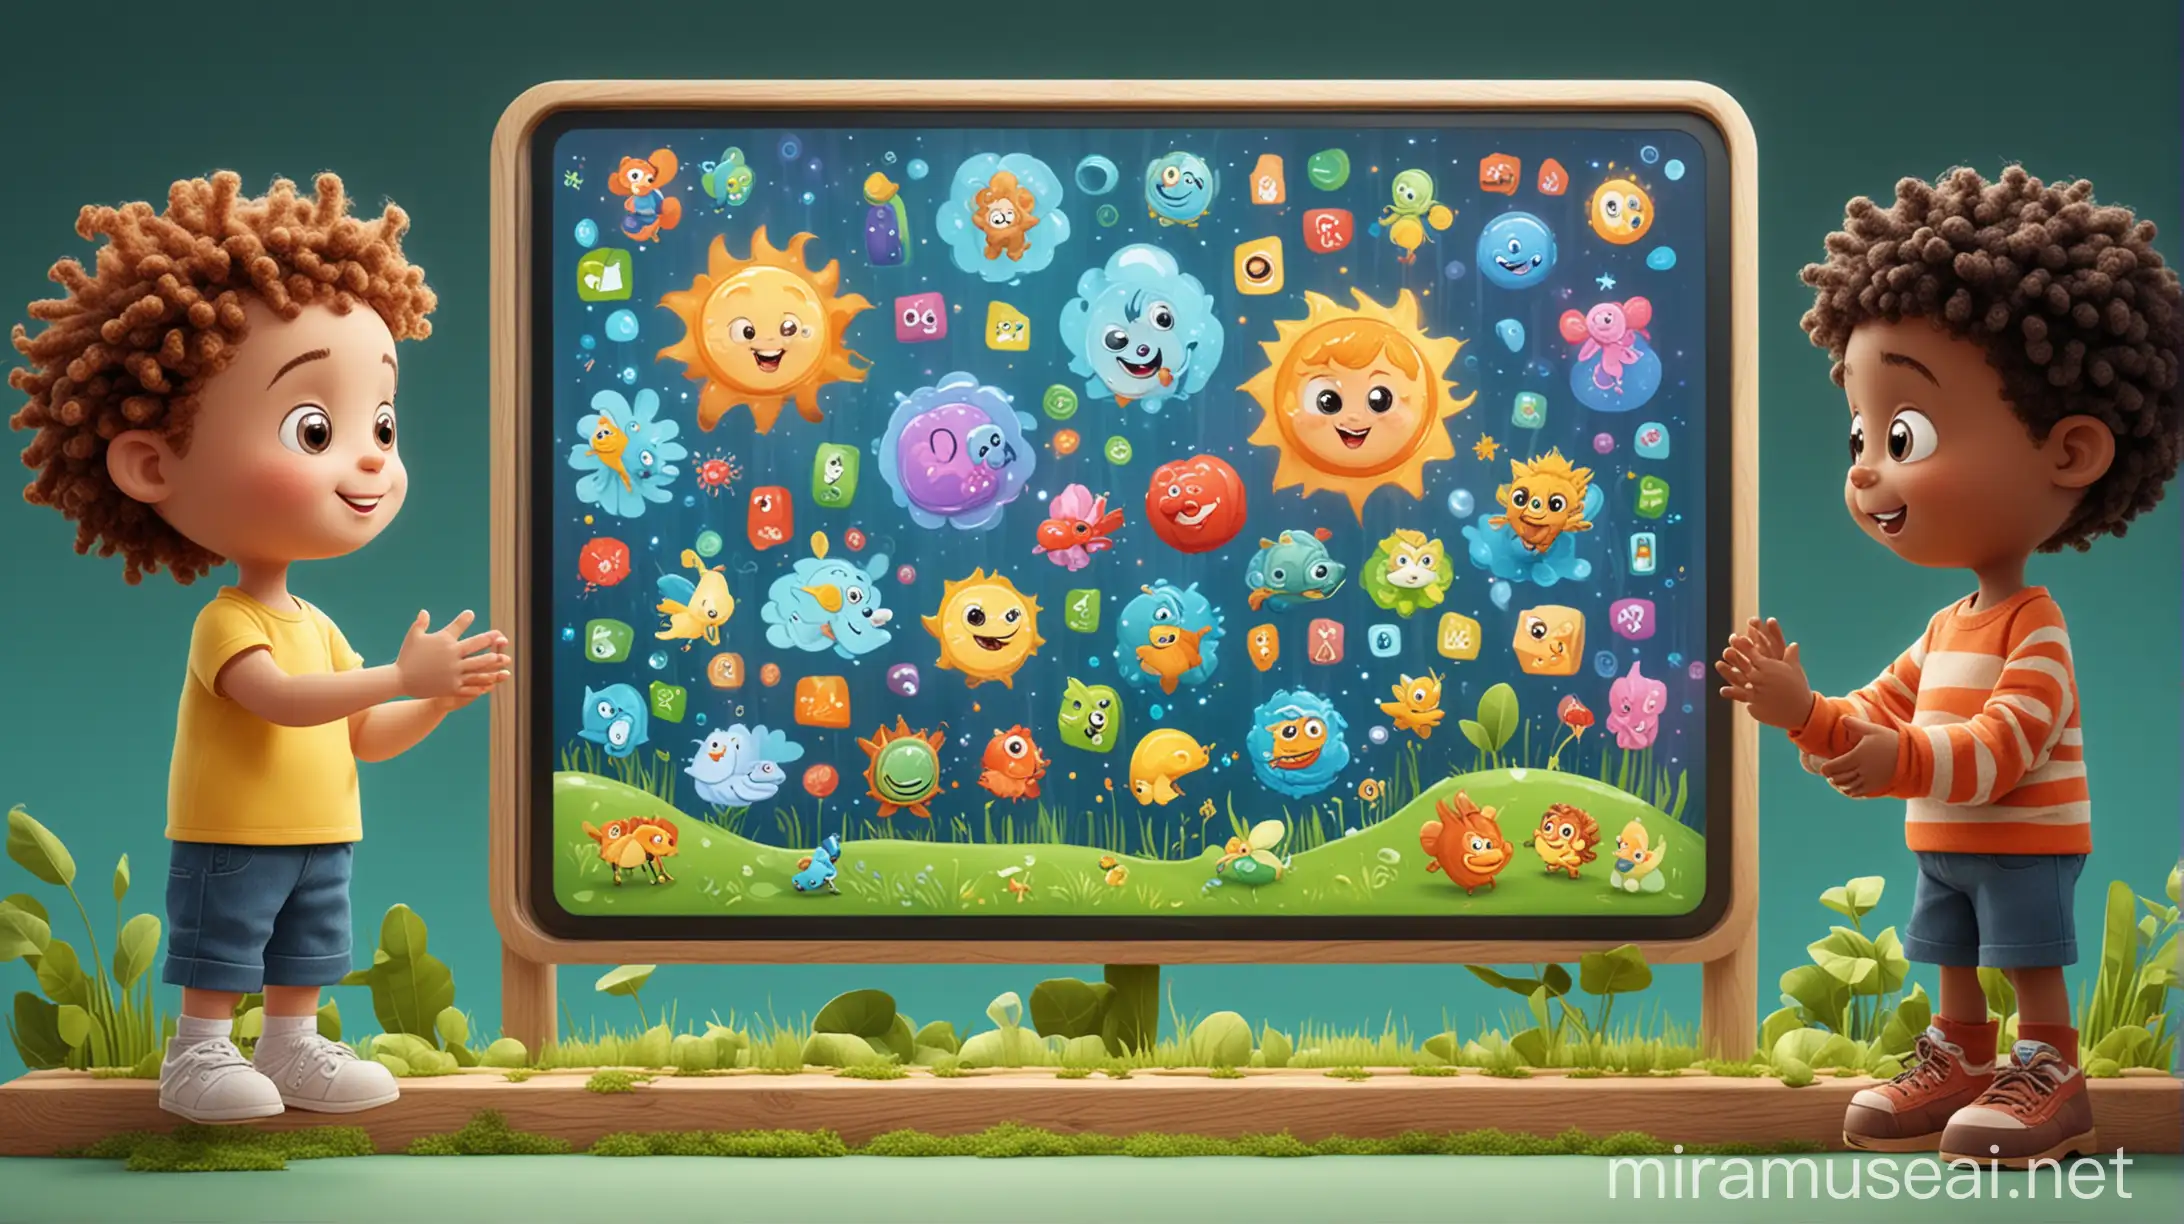 Interactive Sensory Panel with EcoApp for Children Educational Games and Cute Characters